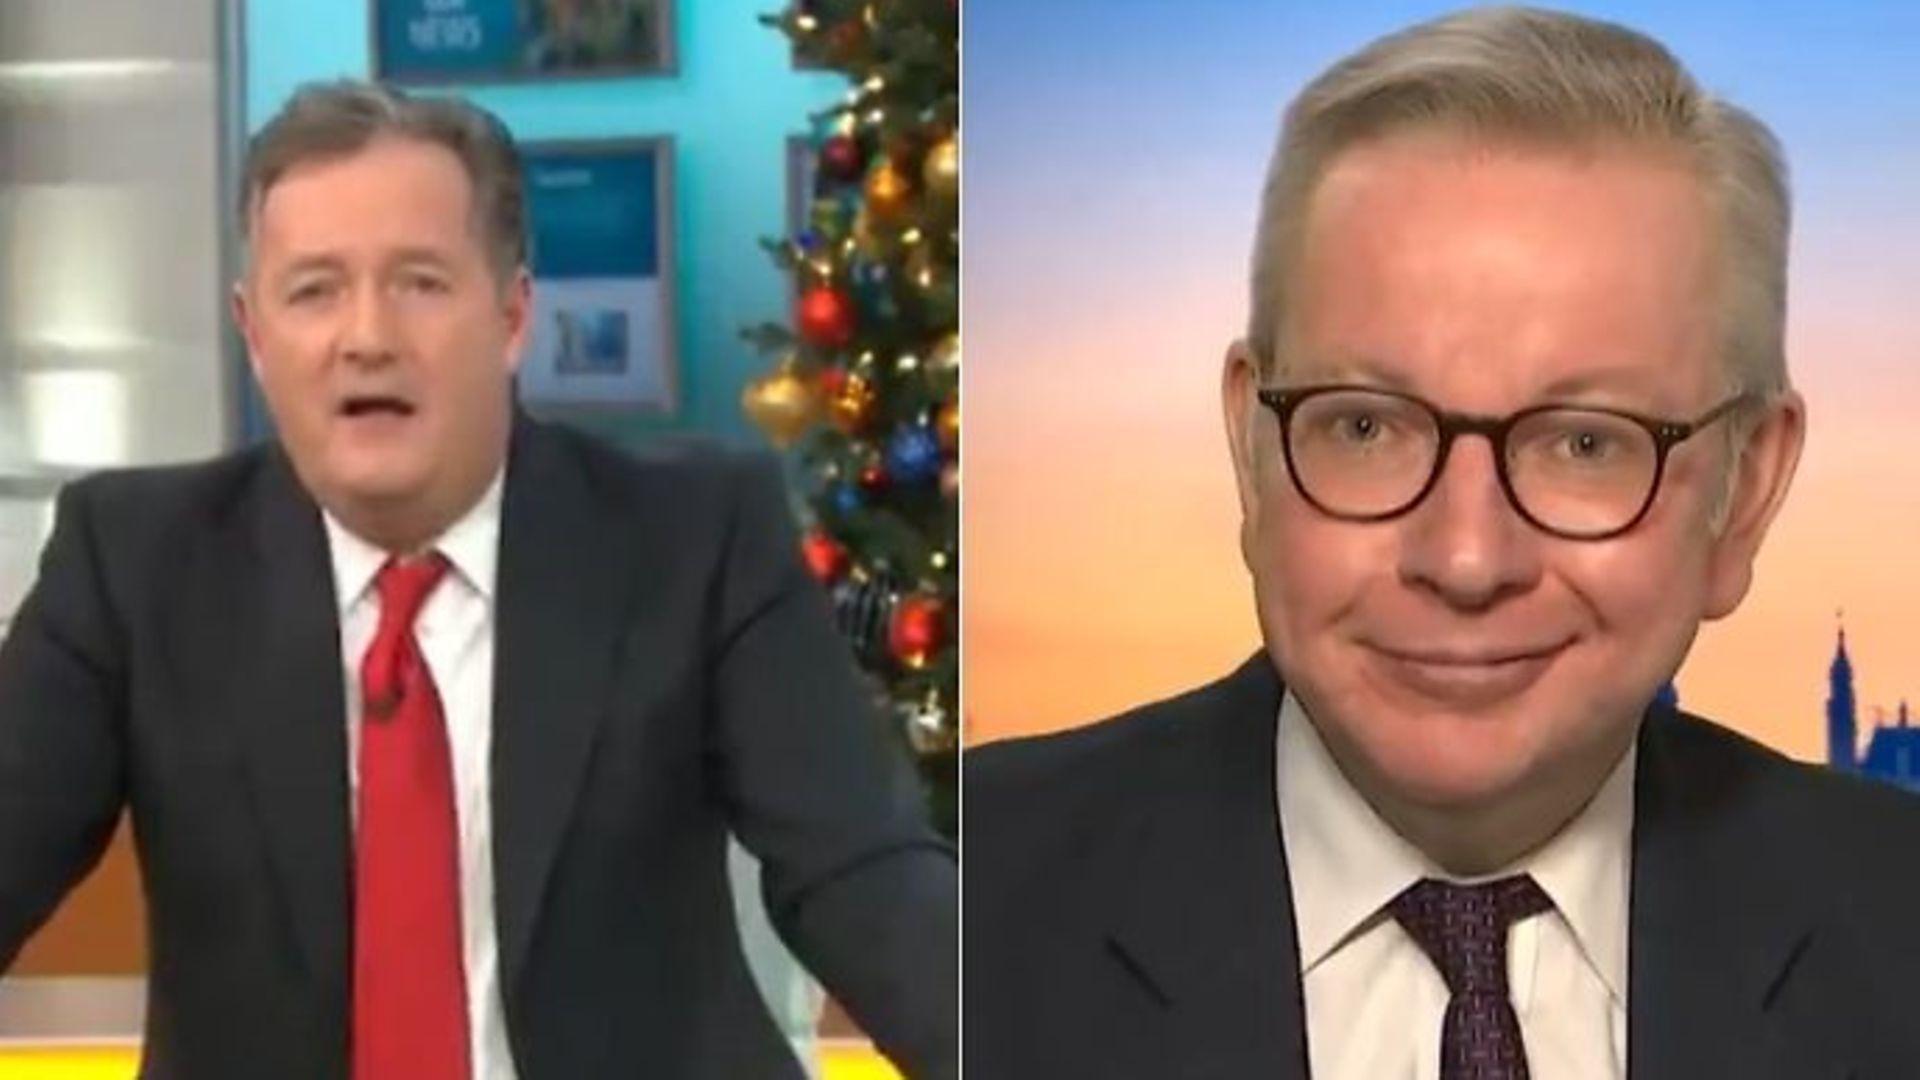 Good Morning Britain presenter Piers Morgan (L) and cabinet minister Michael Gove - Credit: Twitter